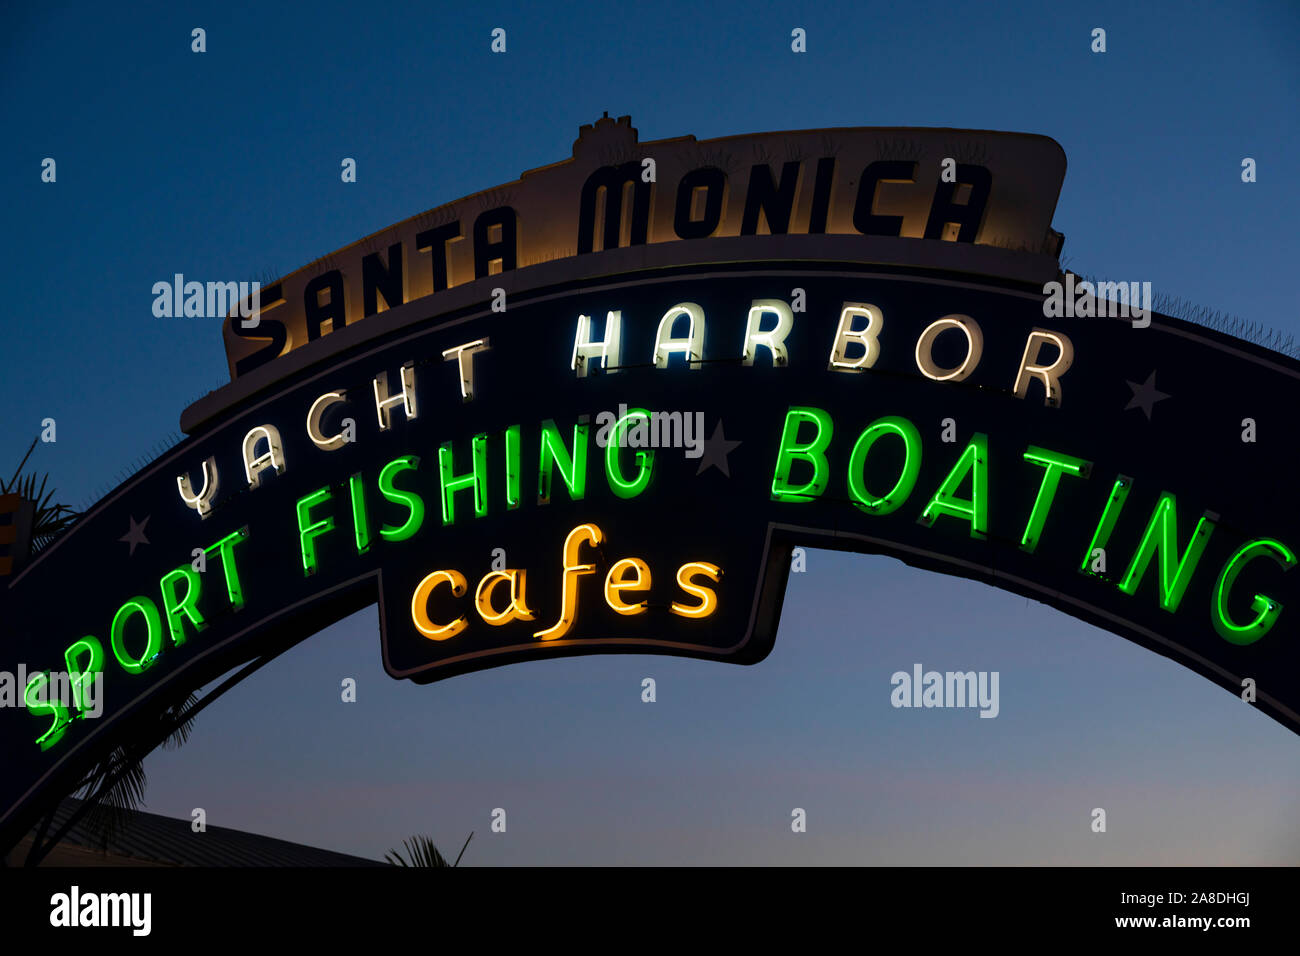 entrance sign to Santa Monica pier. Yacht harbor, sport fishing,boating and cafes.  Los Angeles County, California, United States of America Stock Photo